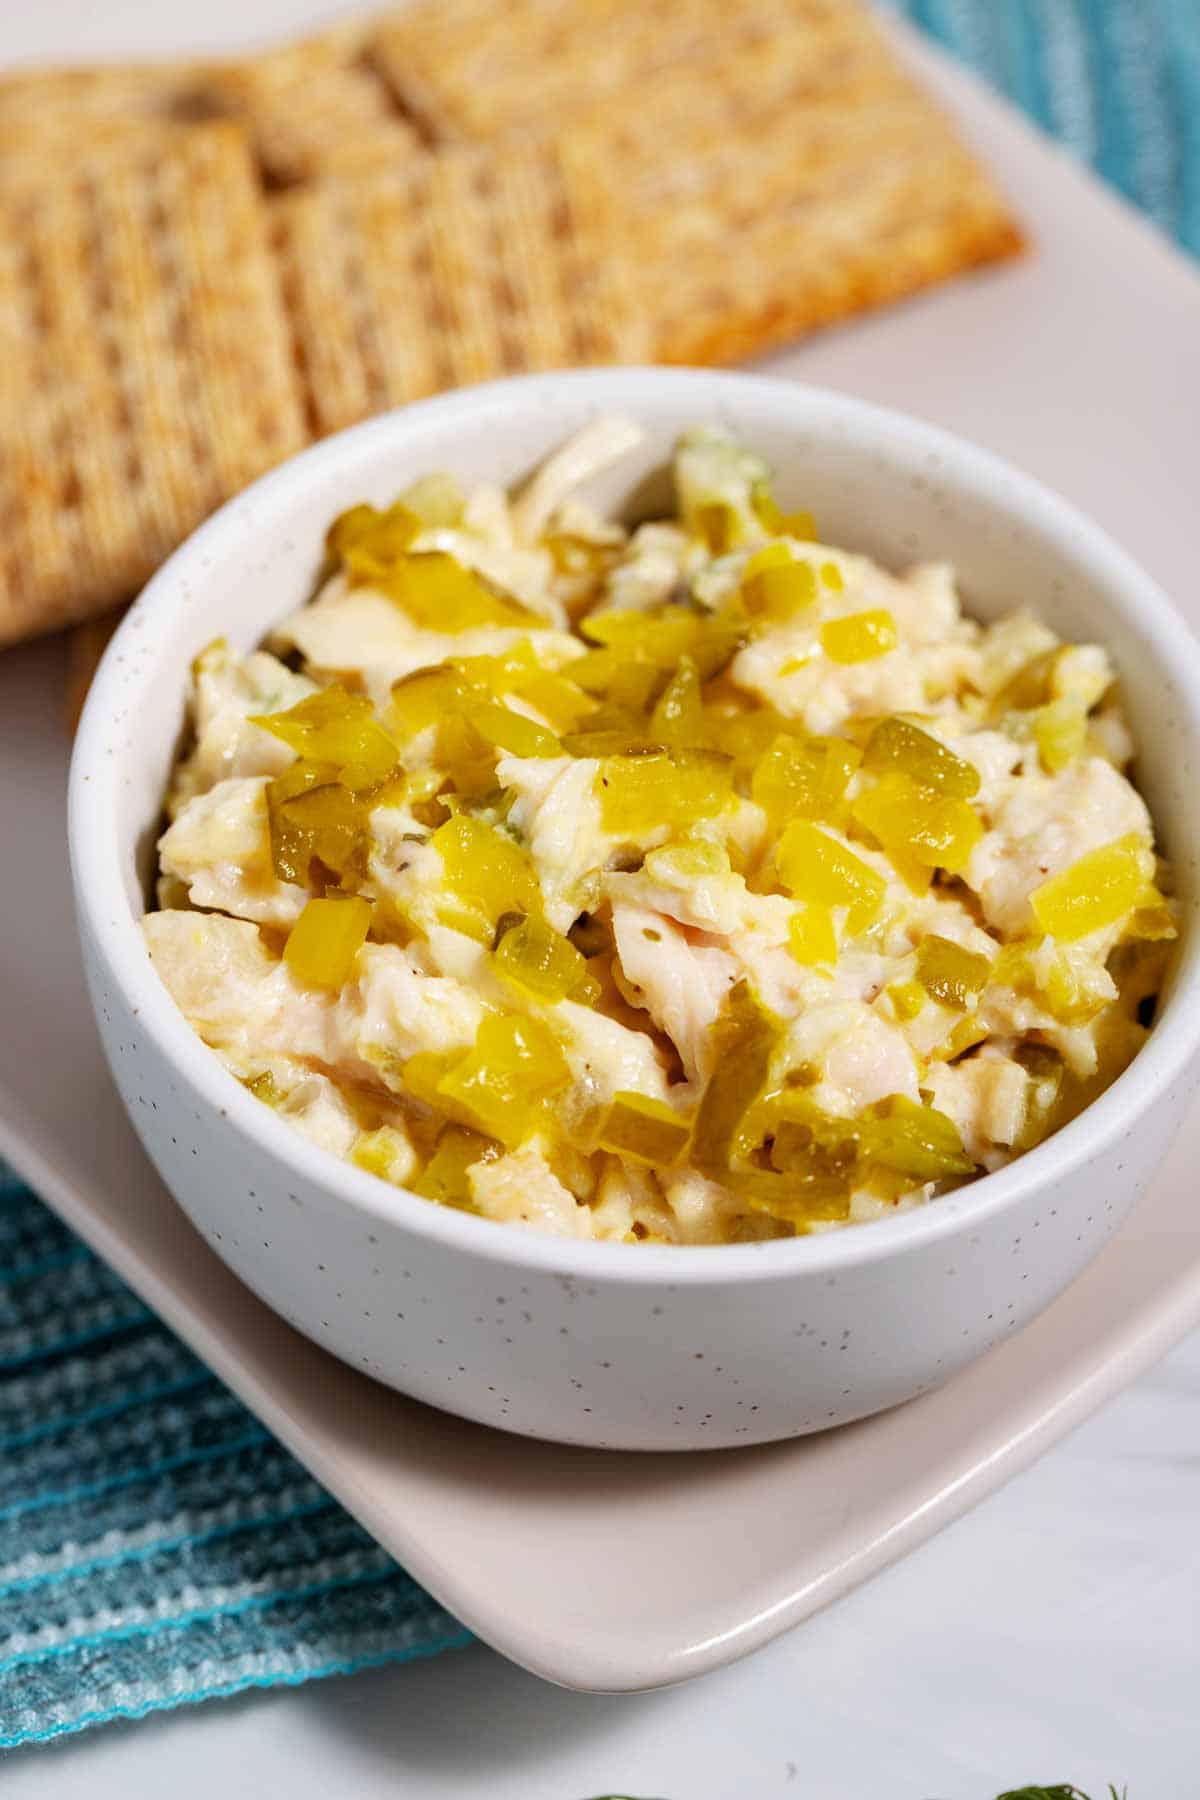 Store-bought chicken salad with pickles added to improve the taste.